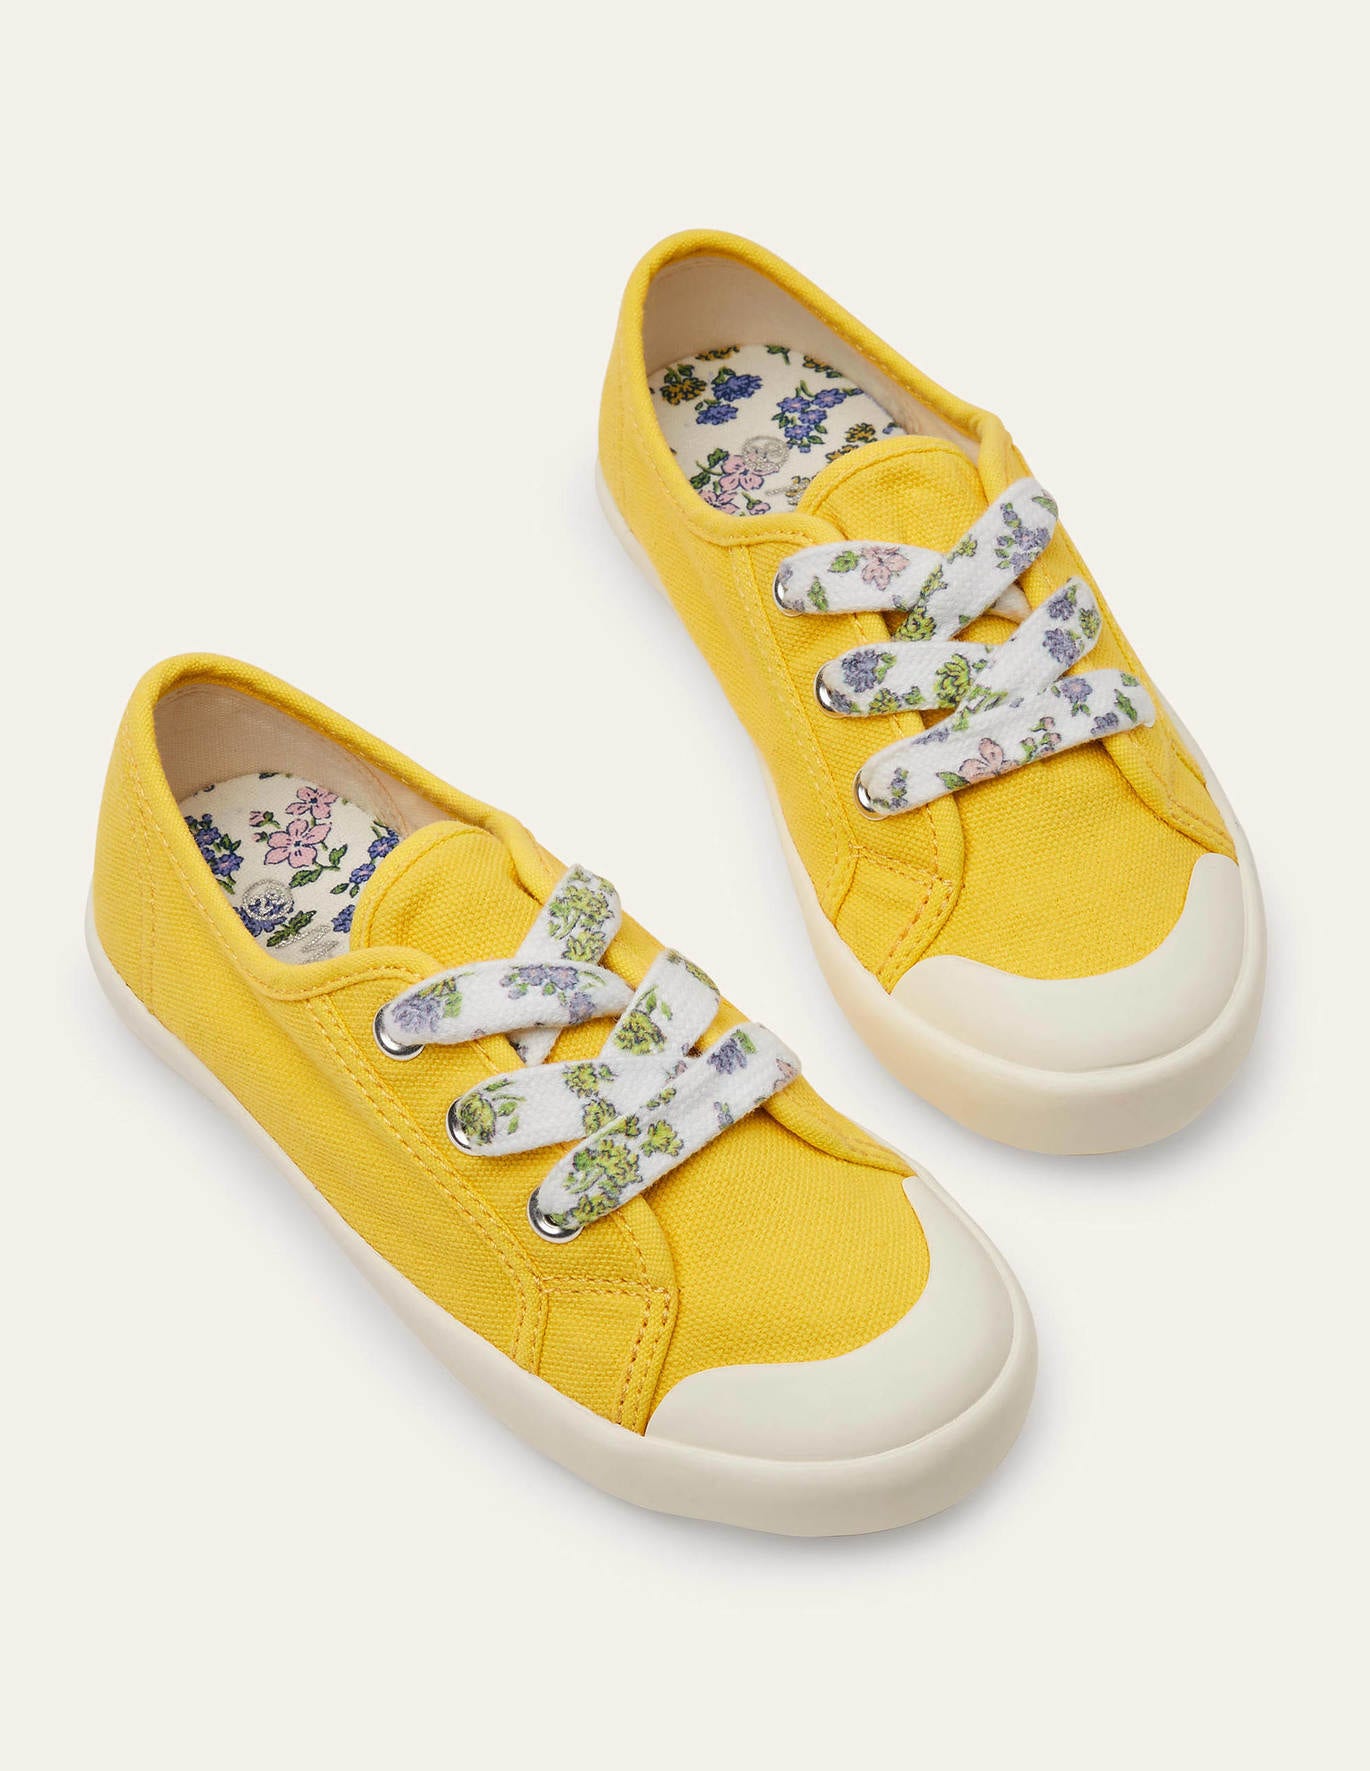 Boden Floral Lace Canvas Shoes - Sweetcorn Yellow